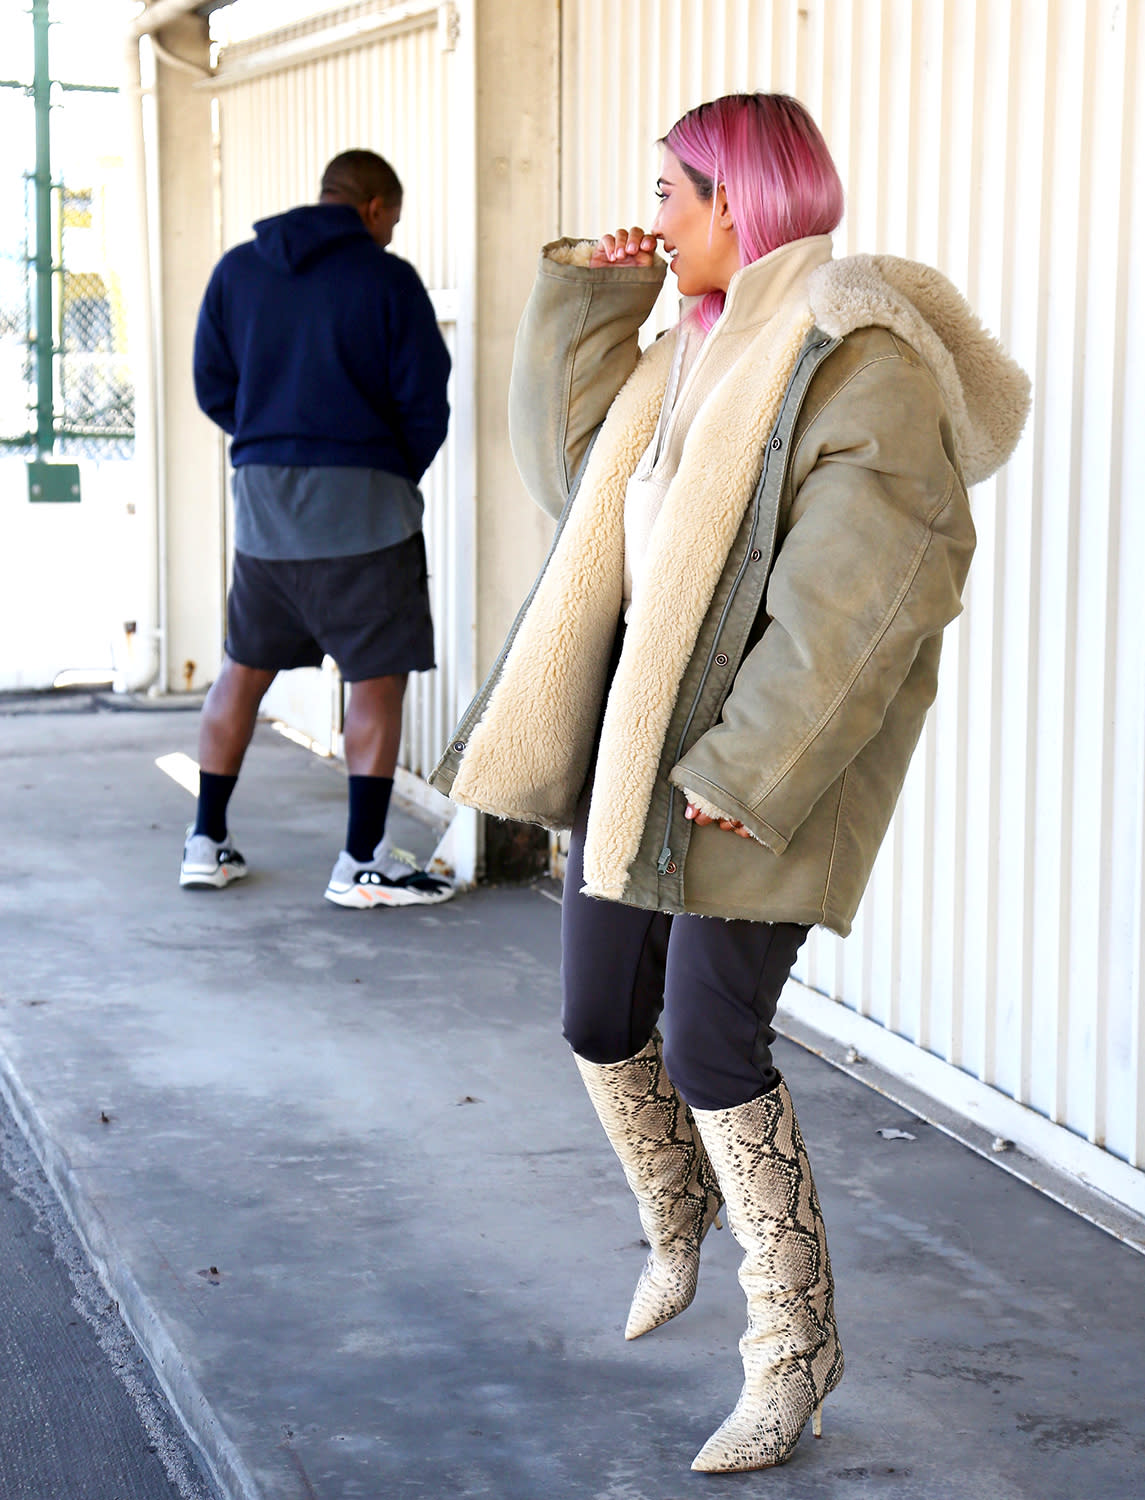 Kim Kardashian, with her new pink locks, cracks up as Kanye West pretends to urinate in front of a photographer in L.A. (Photo:<span> Splash News)</span>